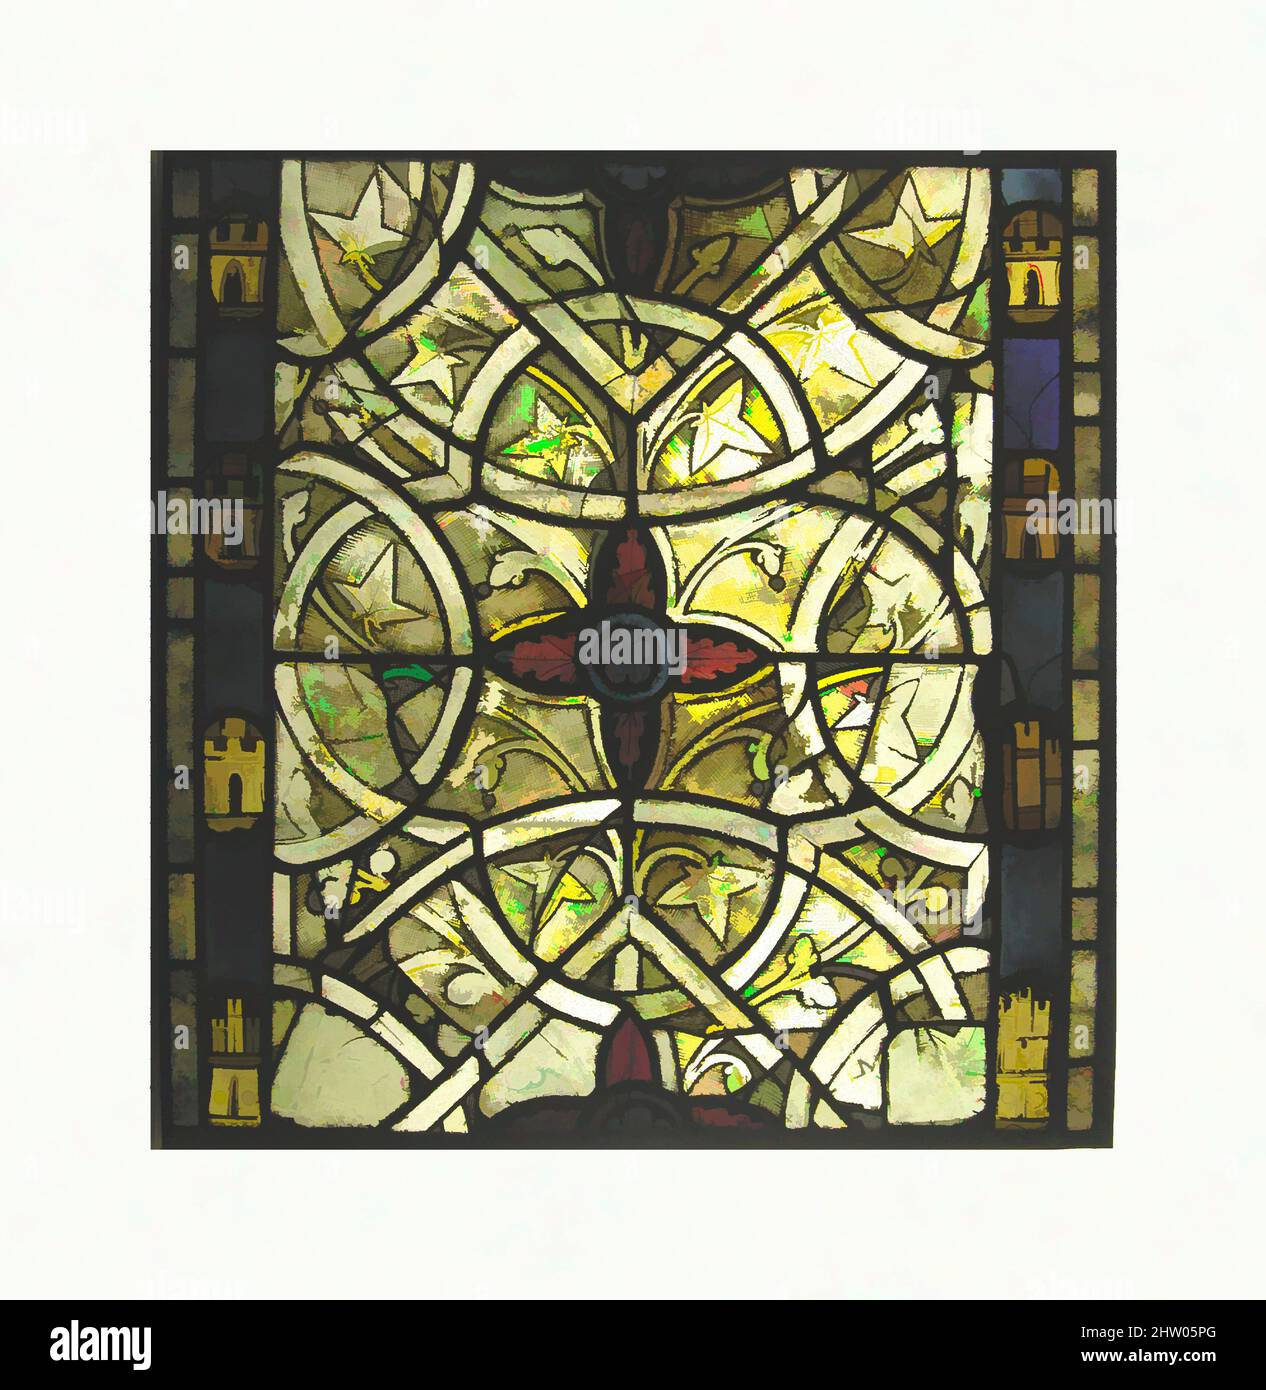 Art inspired by Grisaille Panel, ca. 1265, Made in Rouen, Normandy, France, French, White glass, pot-metal glass, and vitreous paint, Overall: 23 1/4 x 20 11/16 in. (59 x 52.6 cm), Glass-Stained, These grisaille panels are part of a set of eight once in three different chapels at the, Classic works modernized by Artotop with a splash of modernity. Shapes, color and value, eye-catching visual impact on art. Emotions through freedom of artworks in a contemporary way. A timeless message pursuing a wildly creative new direction. Artists turning to the digital medium and creating the Artotop NFT Stock Photo